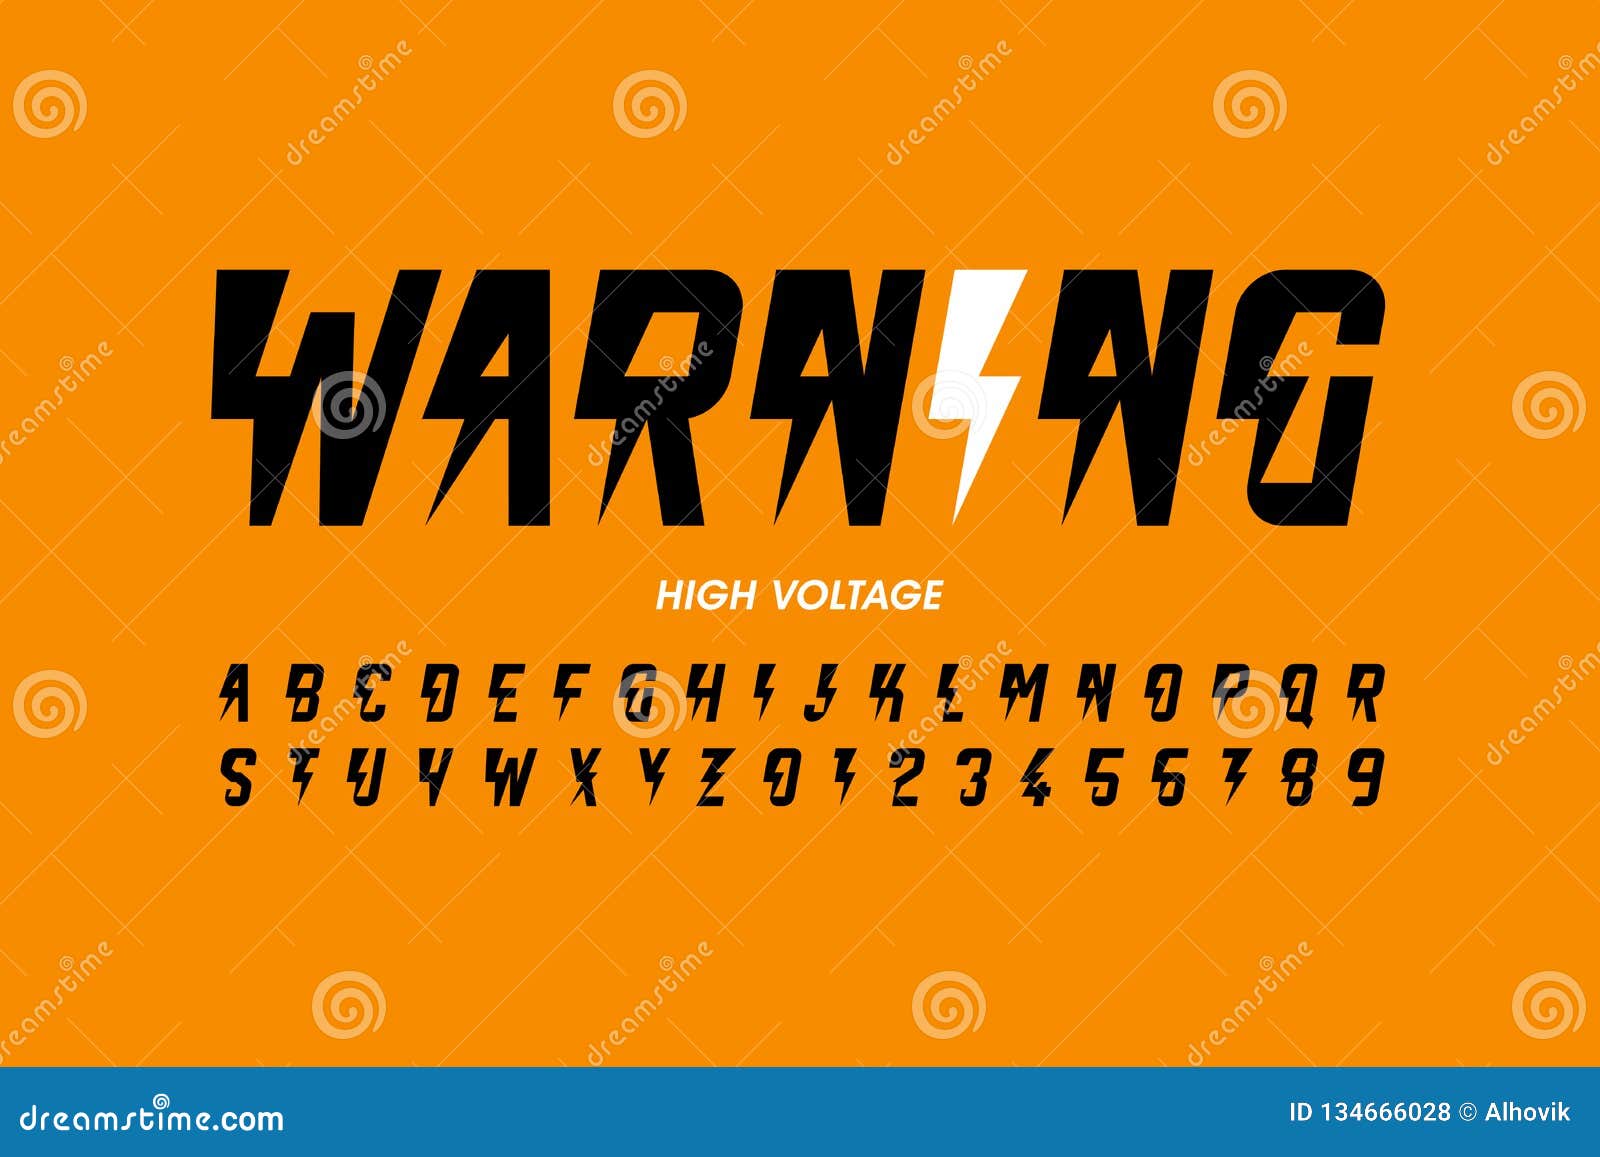 hight voltage style font